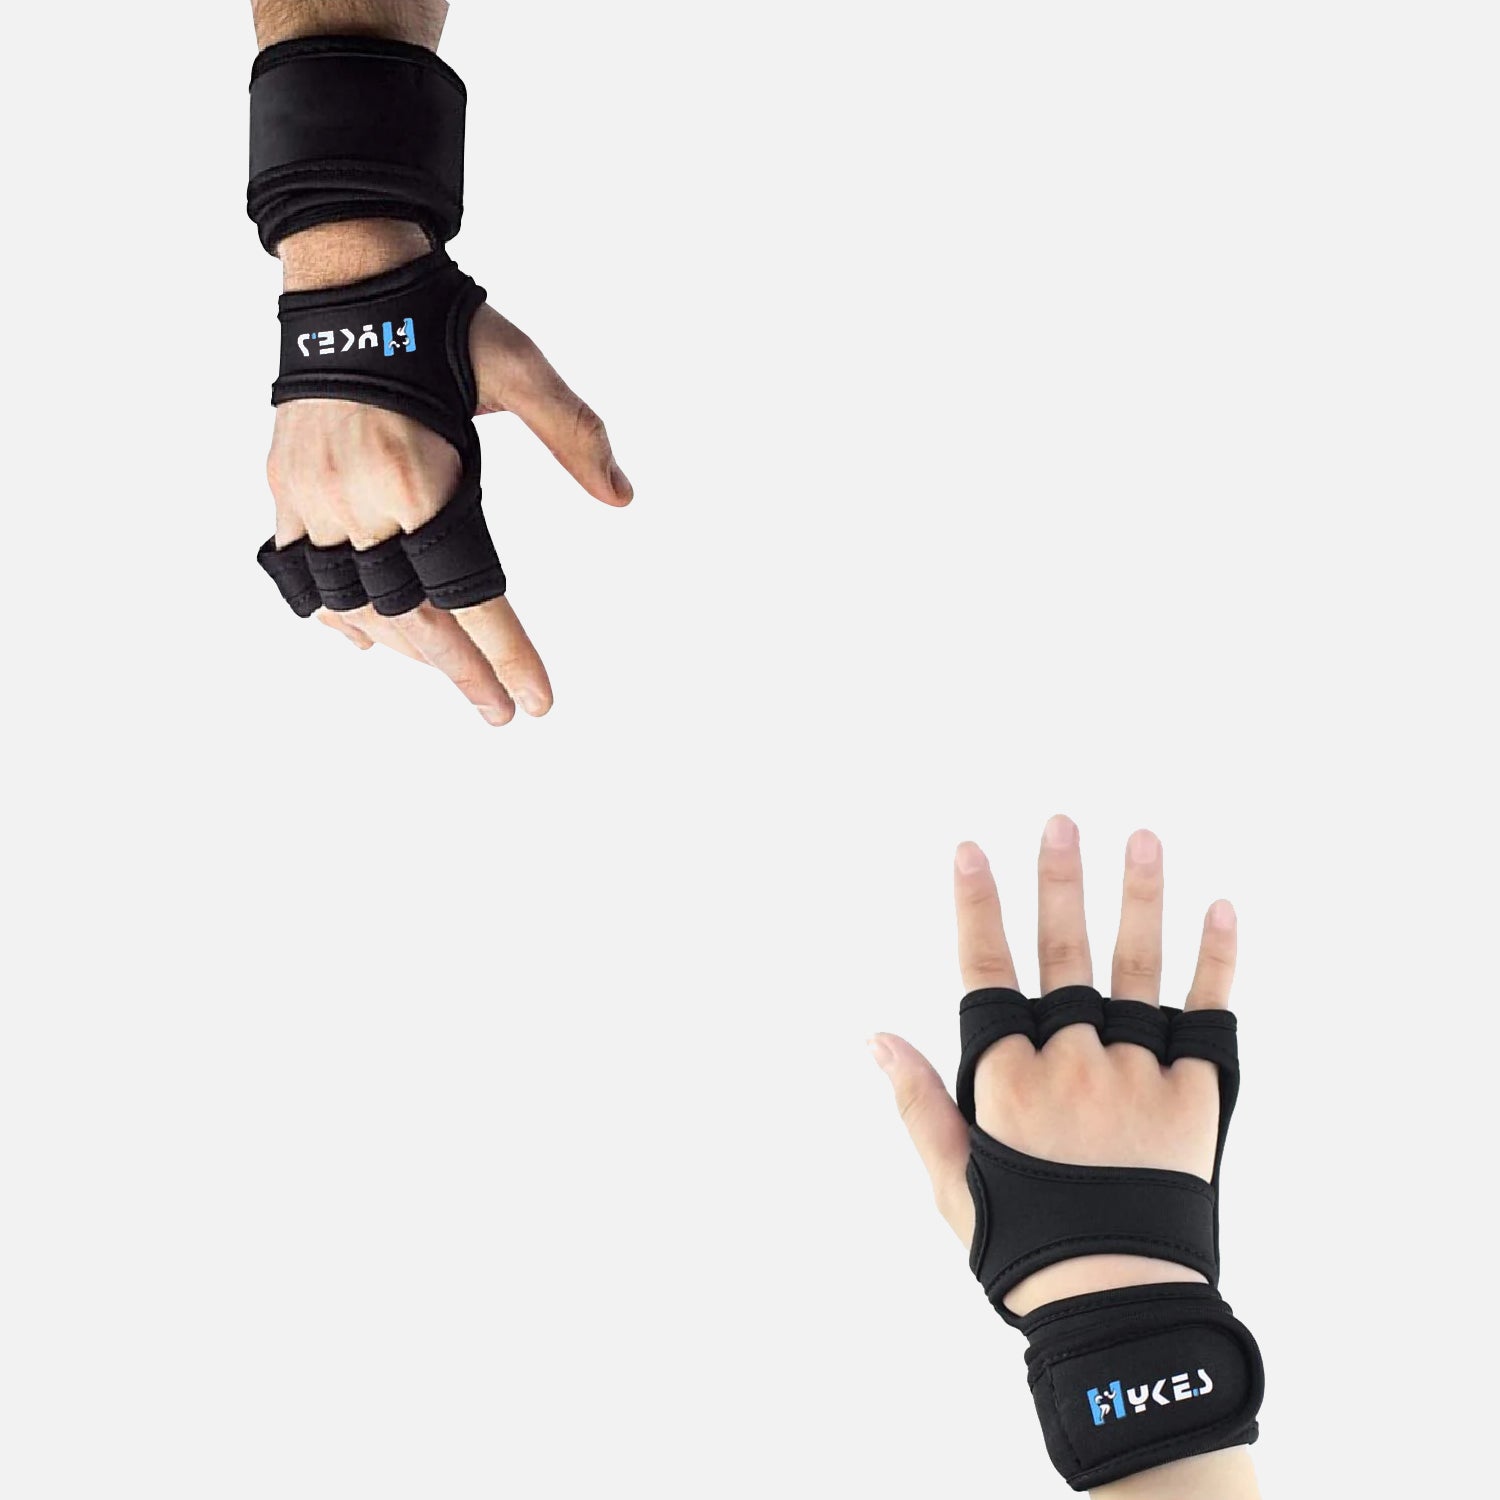 Crossfit Gloves and Weight Lifting Gloves for Men & Women – Hykes